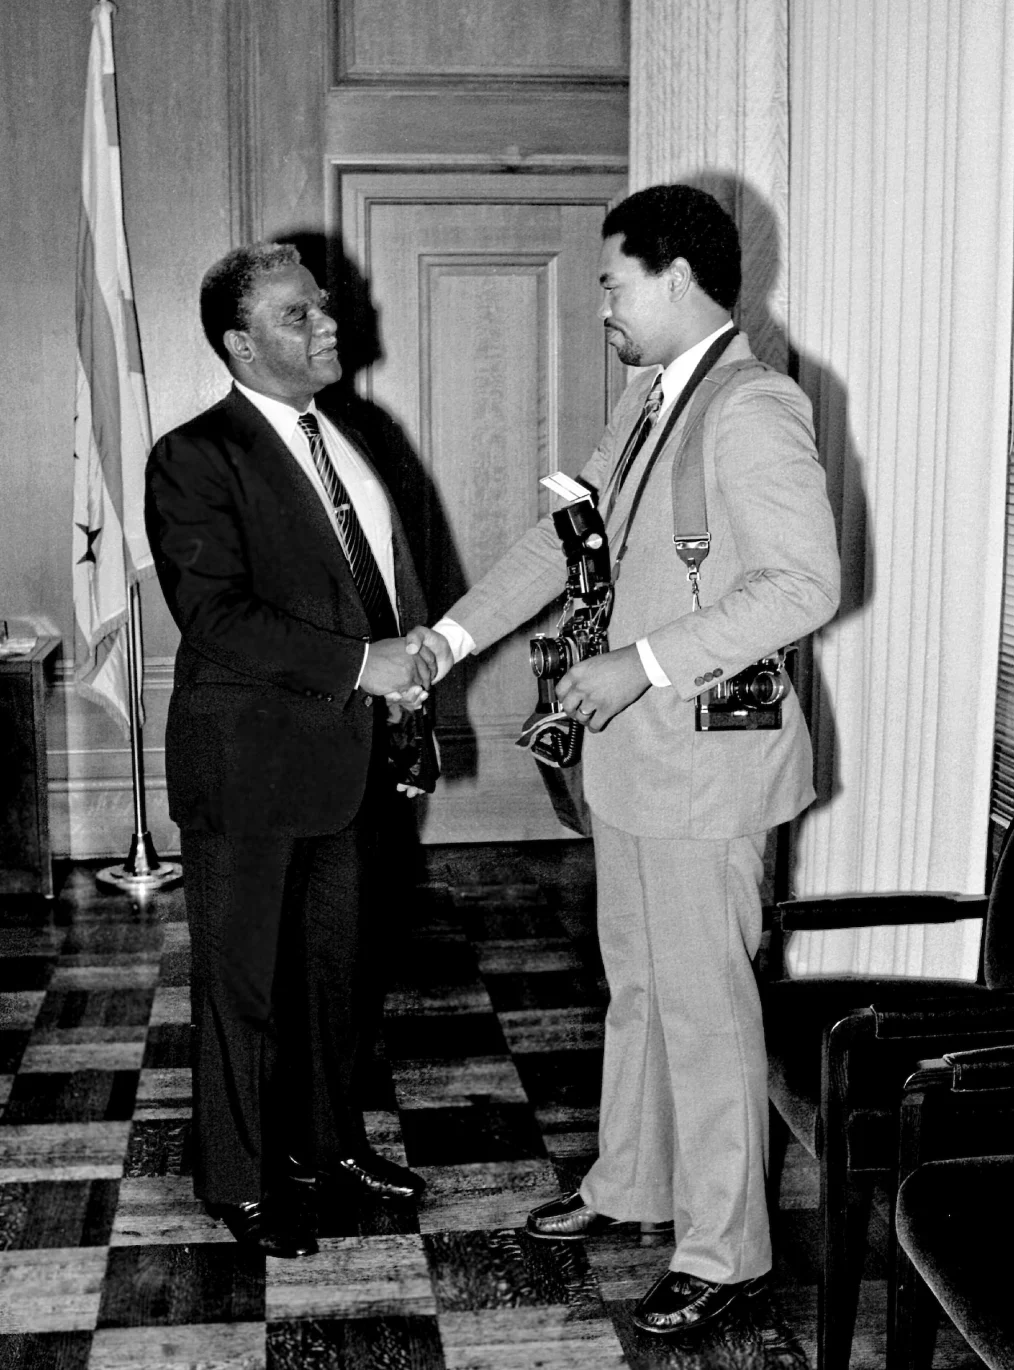 A black and white photograph of a young Black photographer carrying two film cameras shakes hands with Mayor Harold Washington.